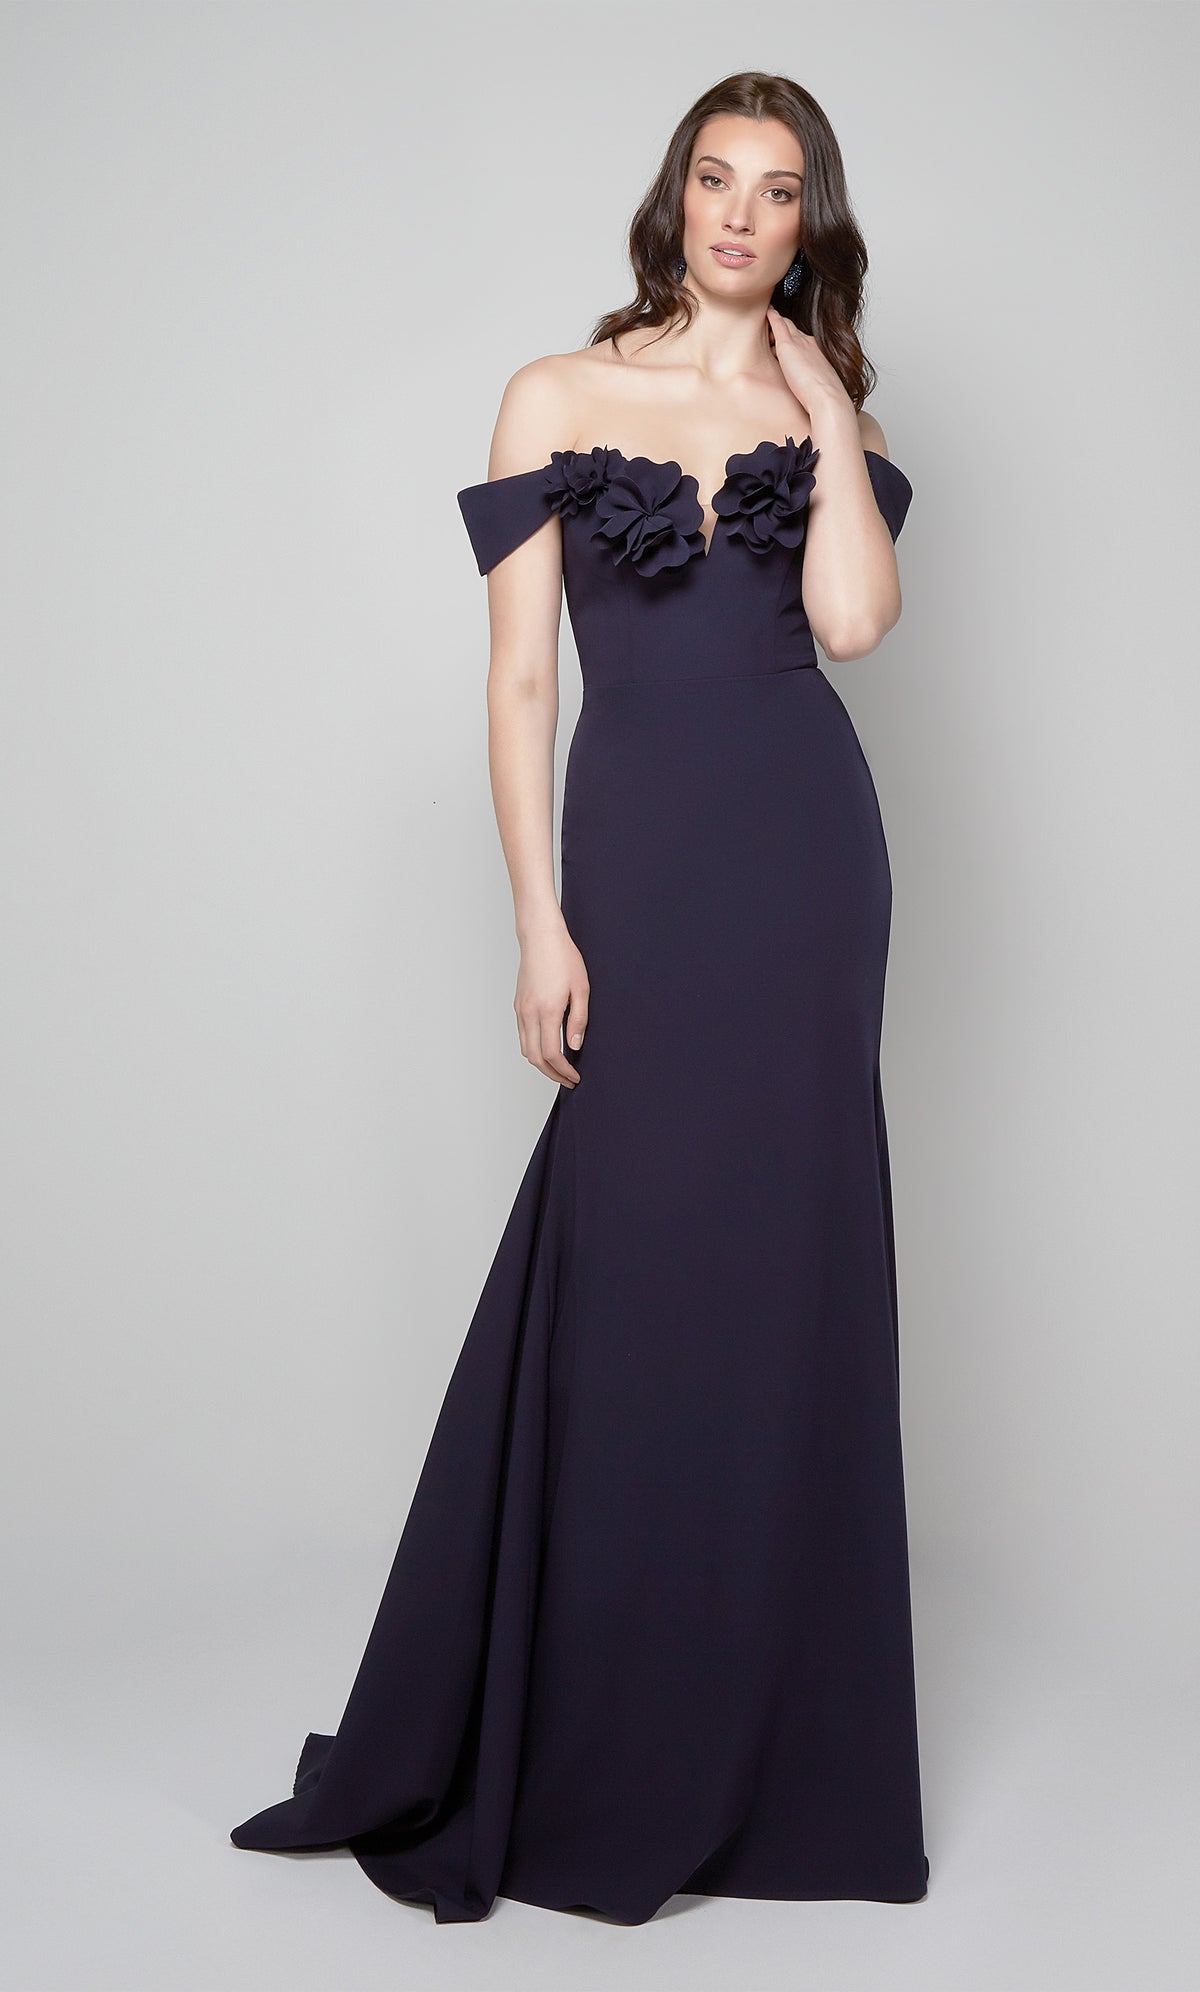 Midnight blue fit and flare evening dress featuring an off the shoulder bodice enhanced with a beautiful flower volant.